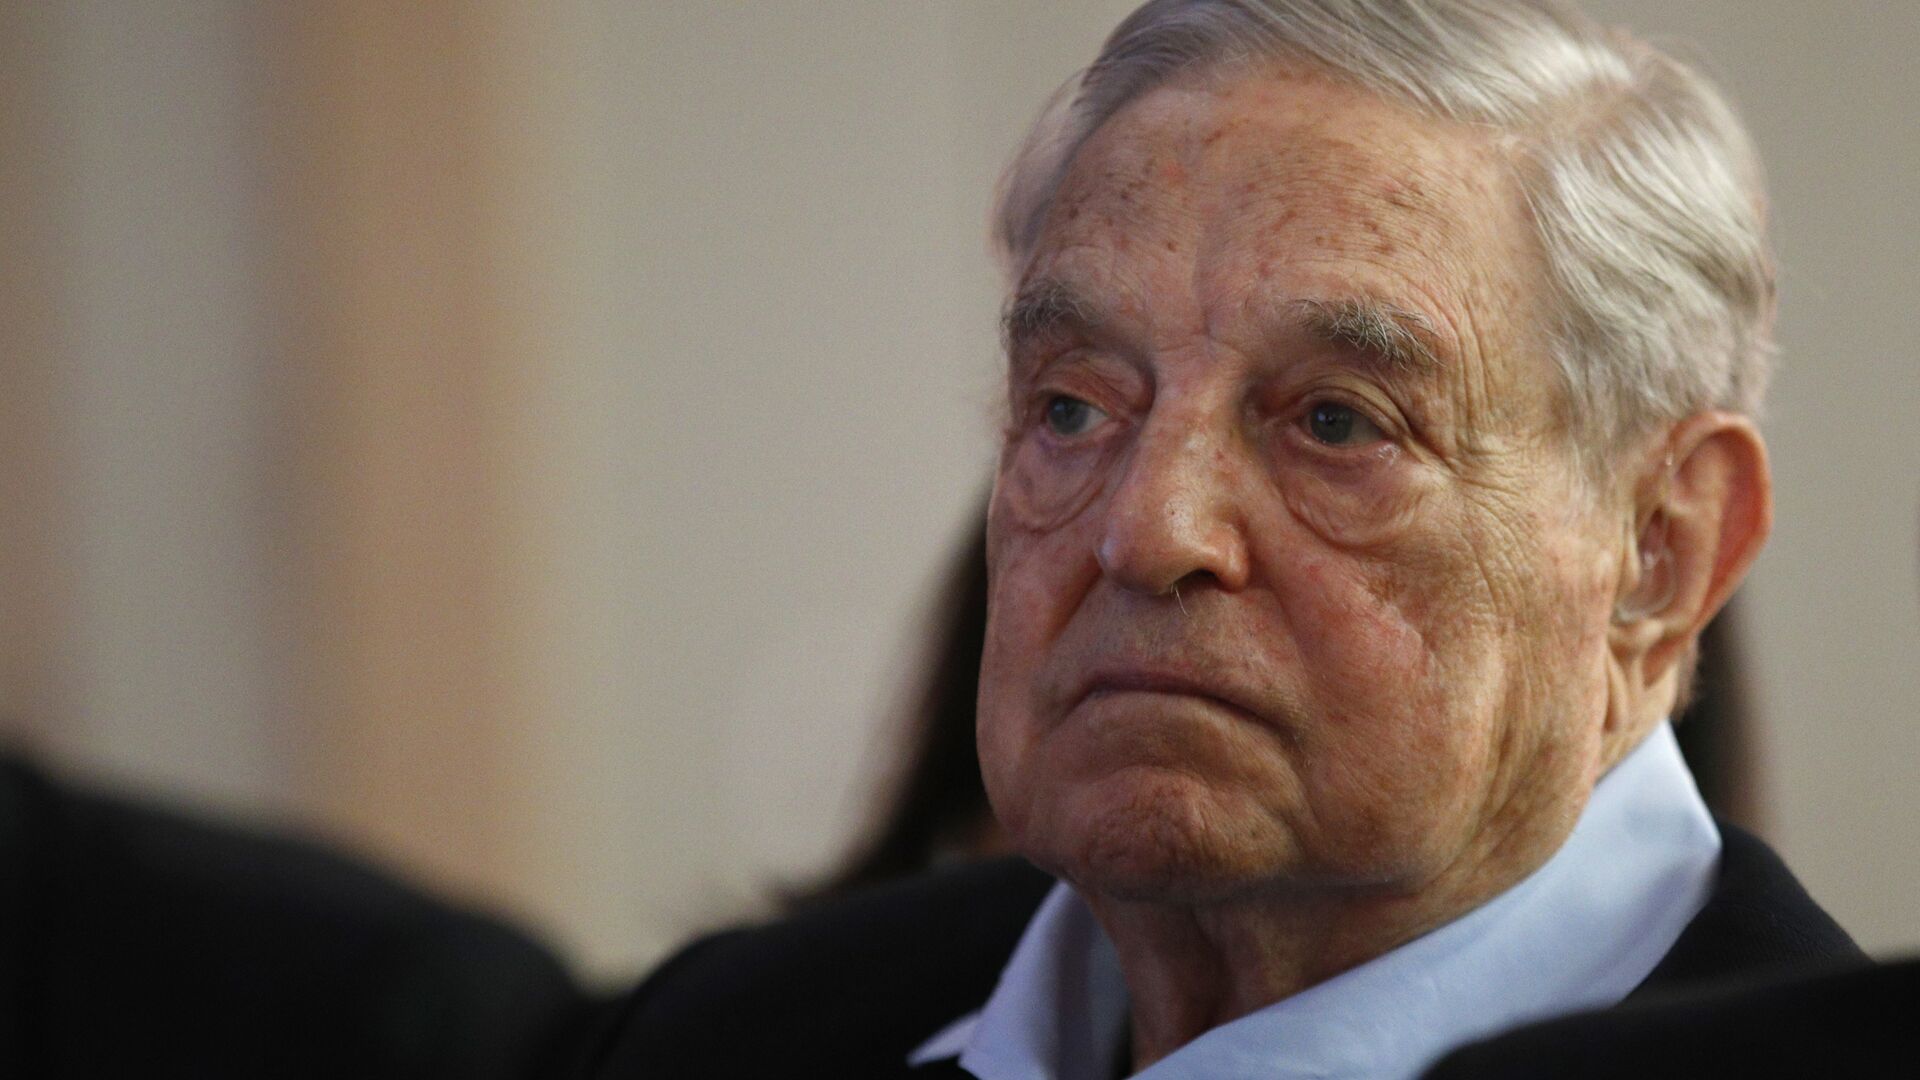 George Soros, Founder and Chairman of the Open Society Foundations listens to the conference after his speech entitled How to save the European Union as he attends the European Council On Foreign Relations Annual Council Meeting in Paris, Tuesday, May 29, 2018 - Sputnik International, 1920, 09.04.2022